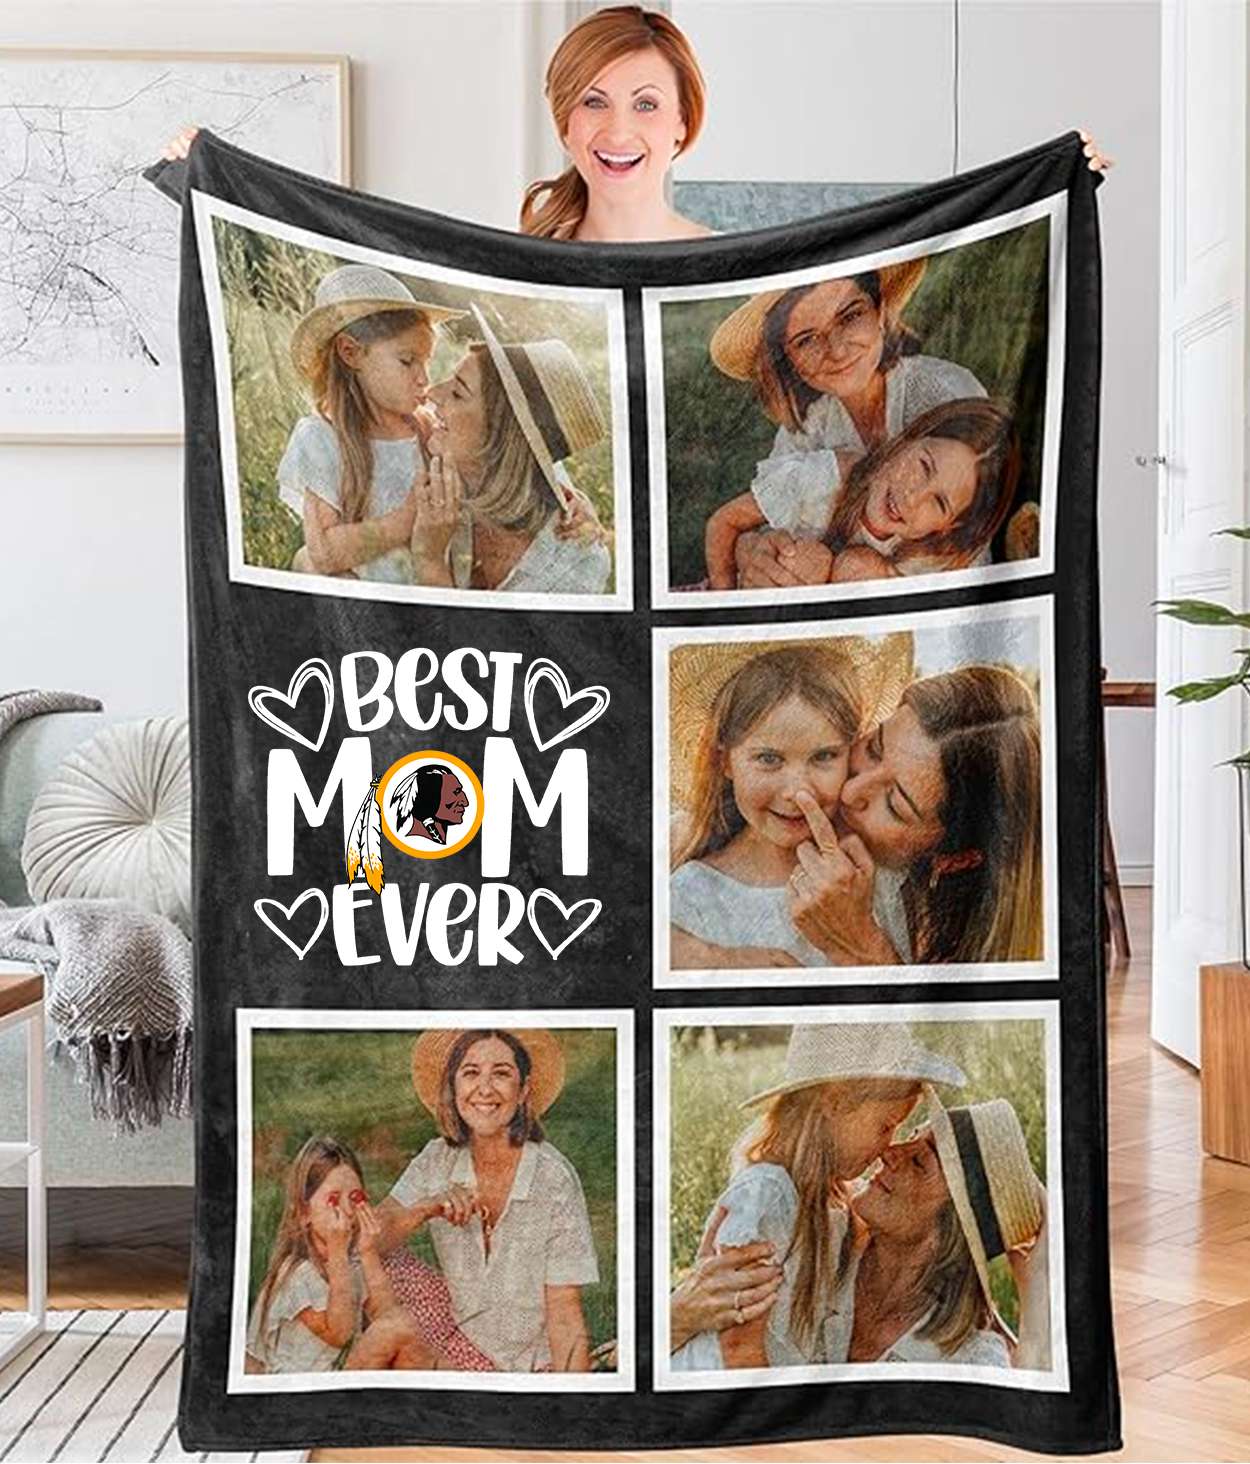 Best Mom Ever - Custom NFL Washington Commanders Blankets with Pictures for Mother's Day Gift